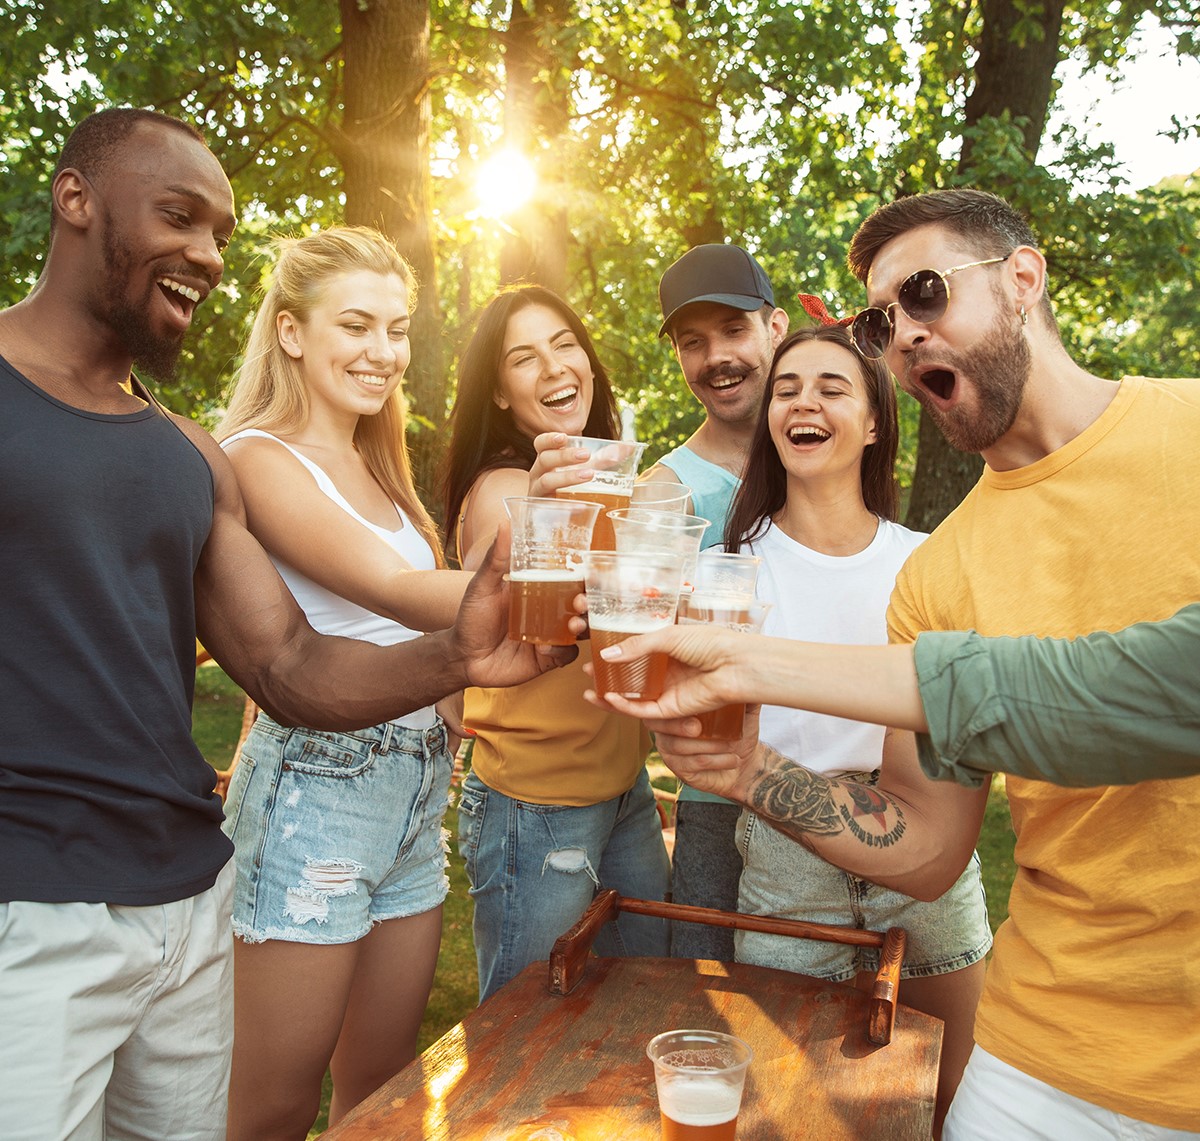 A group of people stand with beer glasses together smiling.